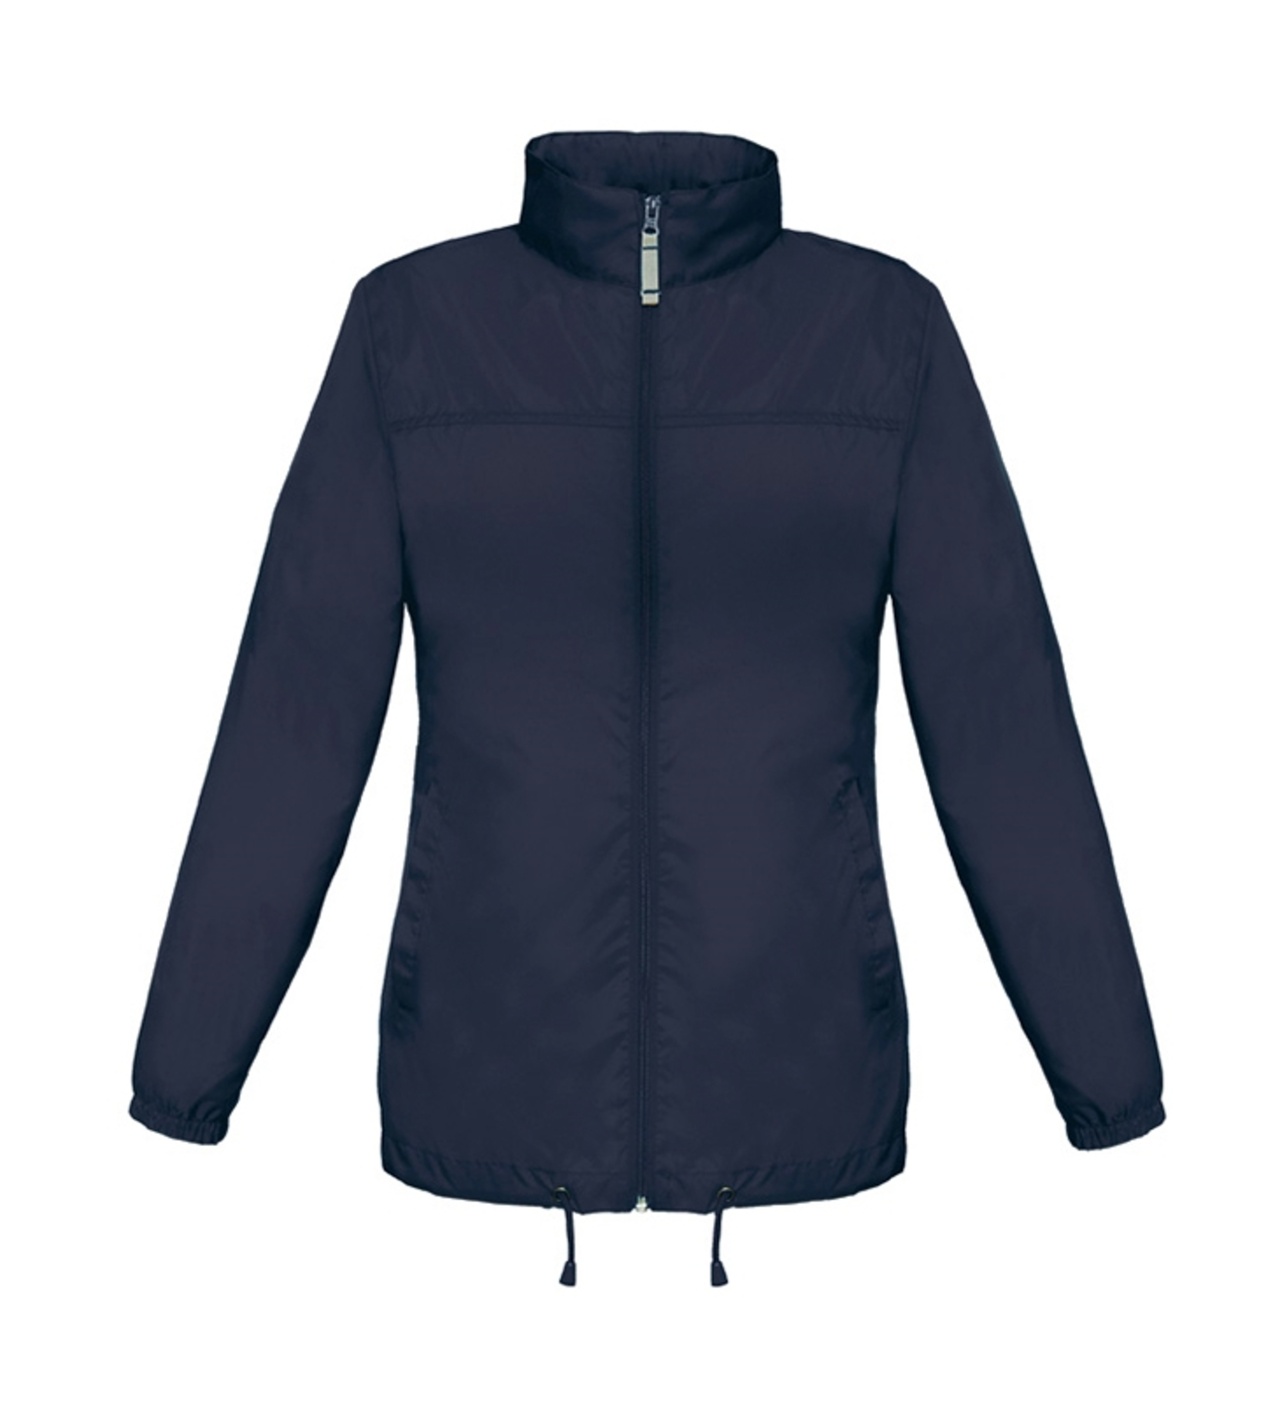 B and C Collection Sirocco Woman - Navy - XXL